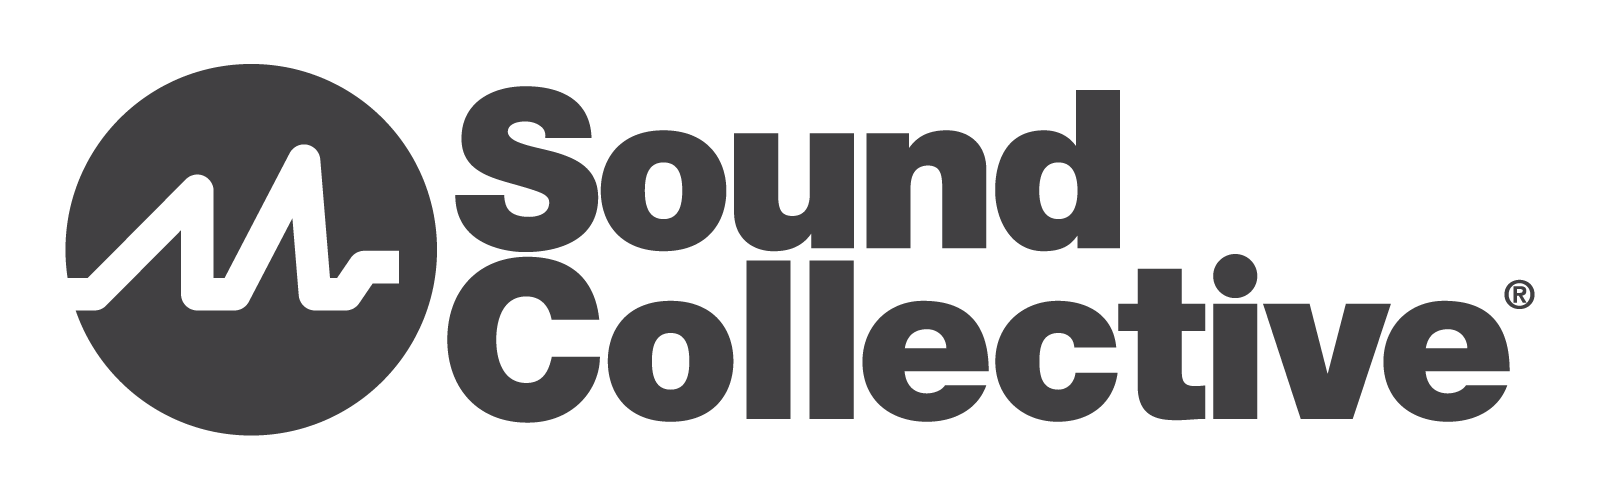 soundcollective,subscription,drummers collective,sound collective,electronic music collective, Online Subscription (SC-WEB V2 Draft), SoundCollective